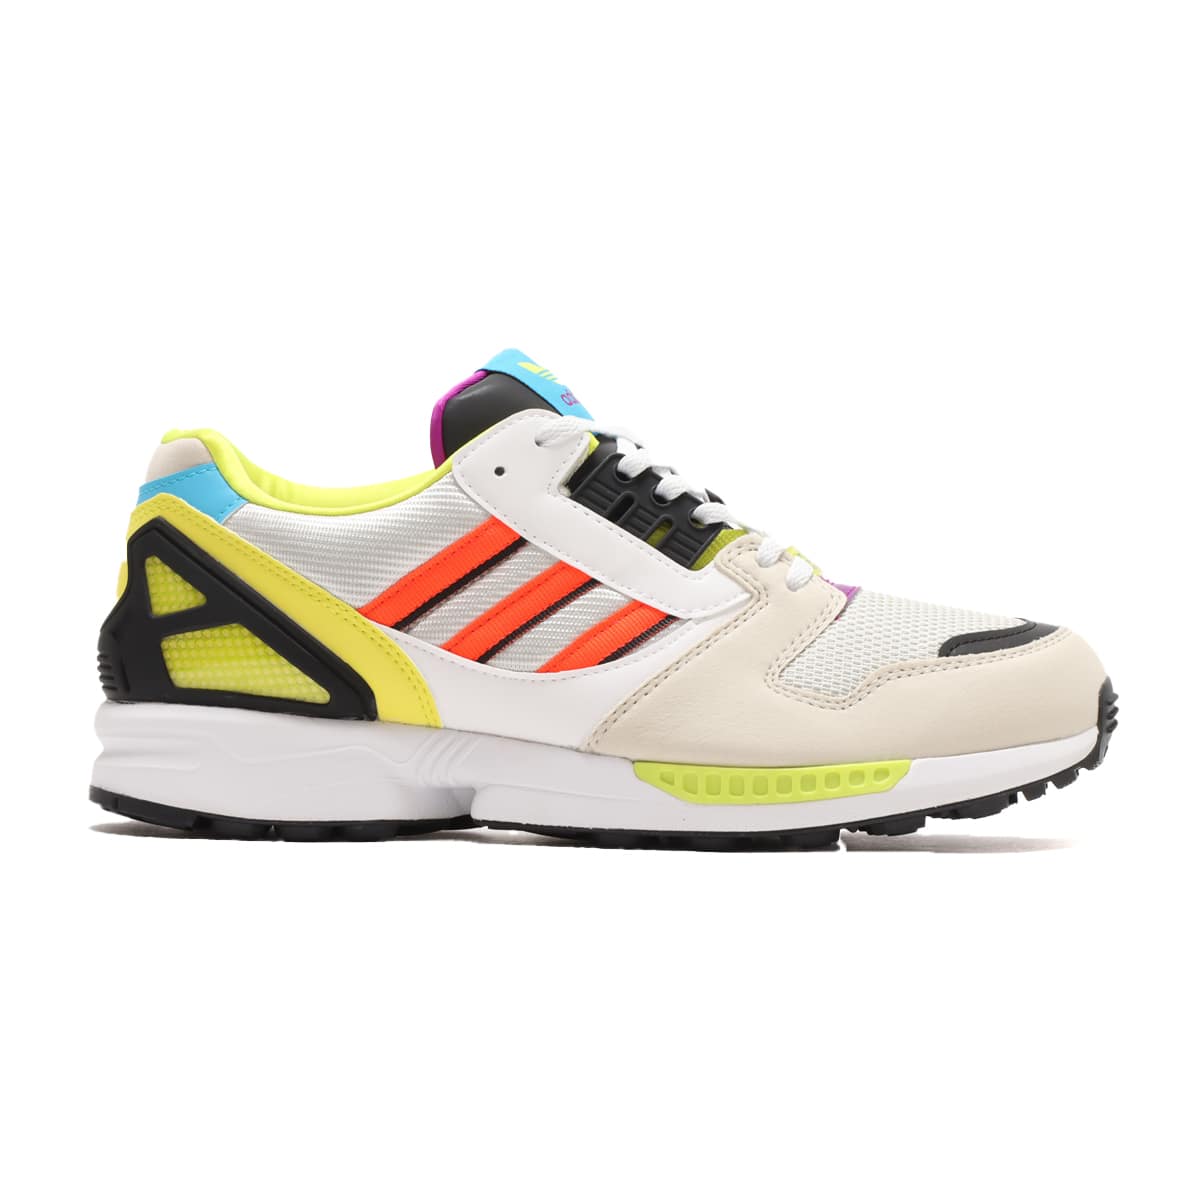 adidas ZX 8000 CLEAR BROWN/FOOTWEAR WHITE/CRYSTAL WHITE 21FW-I